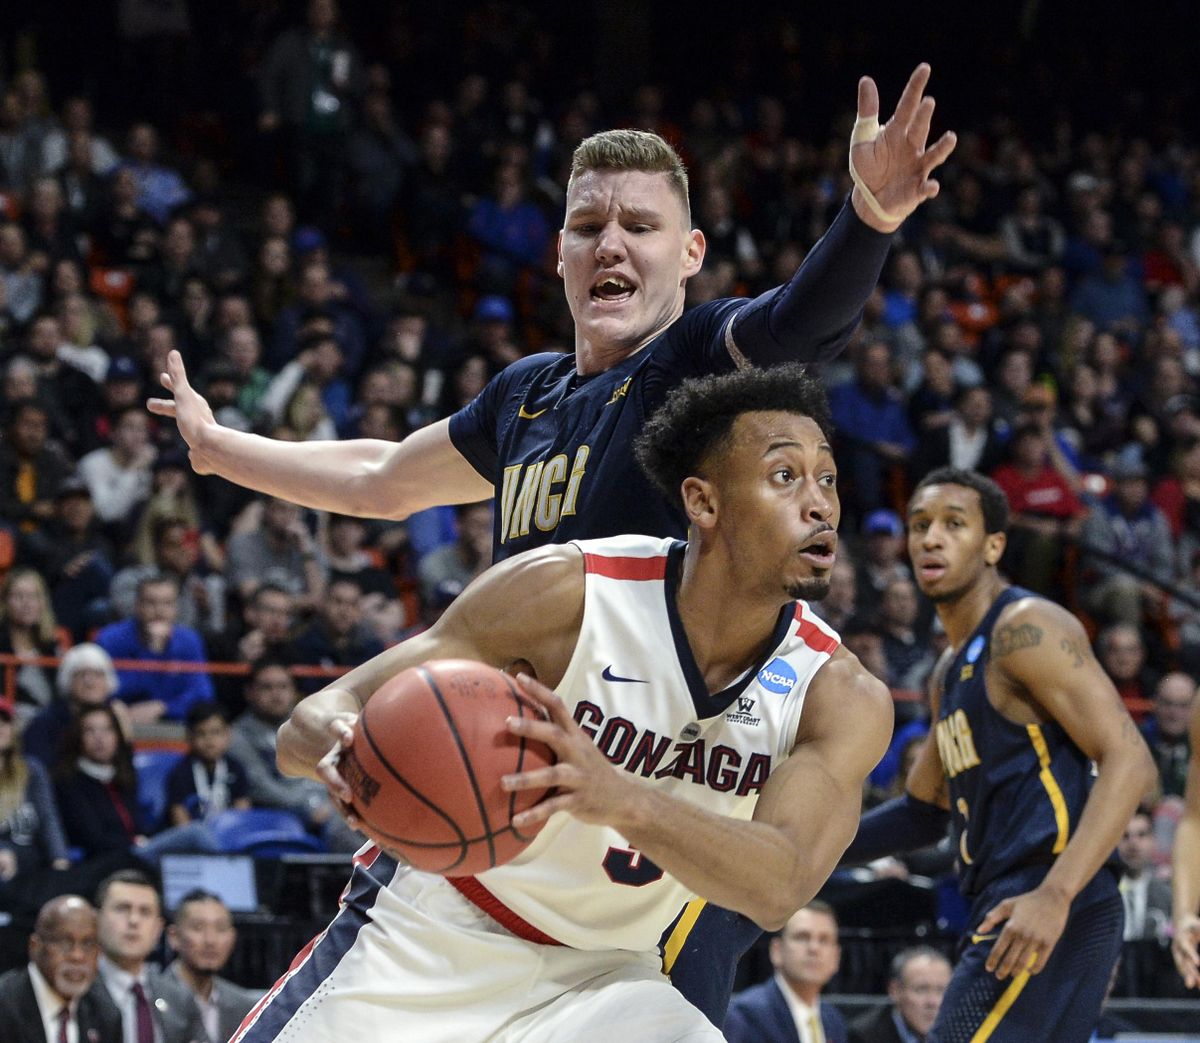 Gonzaga forward Johnathan Williams beats UNC Greensboro forward Jordy Kuiper on the baseline to the basket, Thursday, March 15, 2018 at Taco Bell Arena in Boise, Id. (Dan Pelle / The Spokesman-Review)